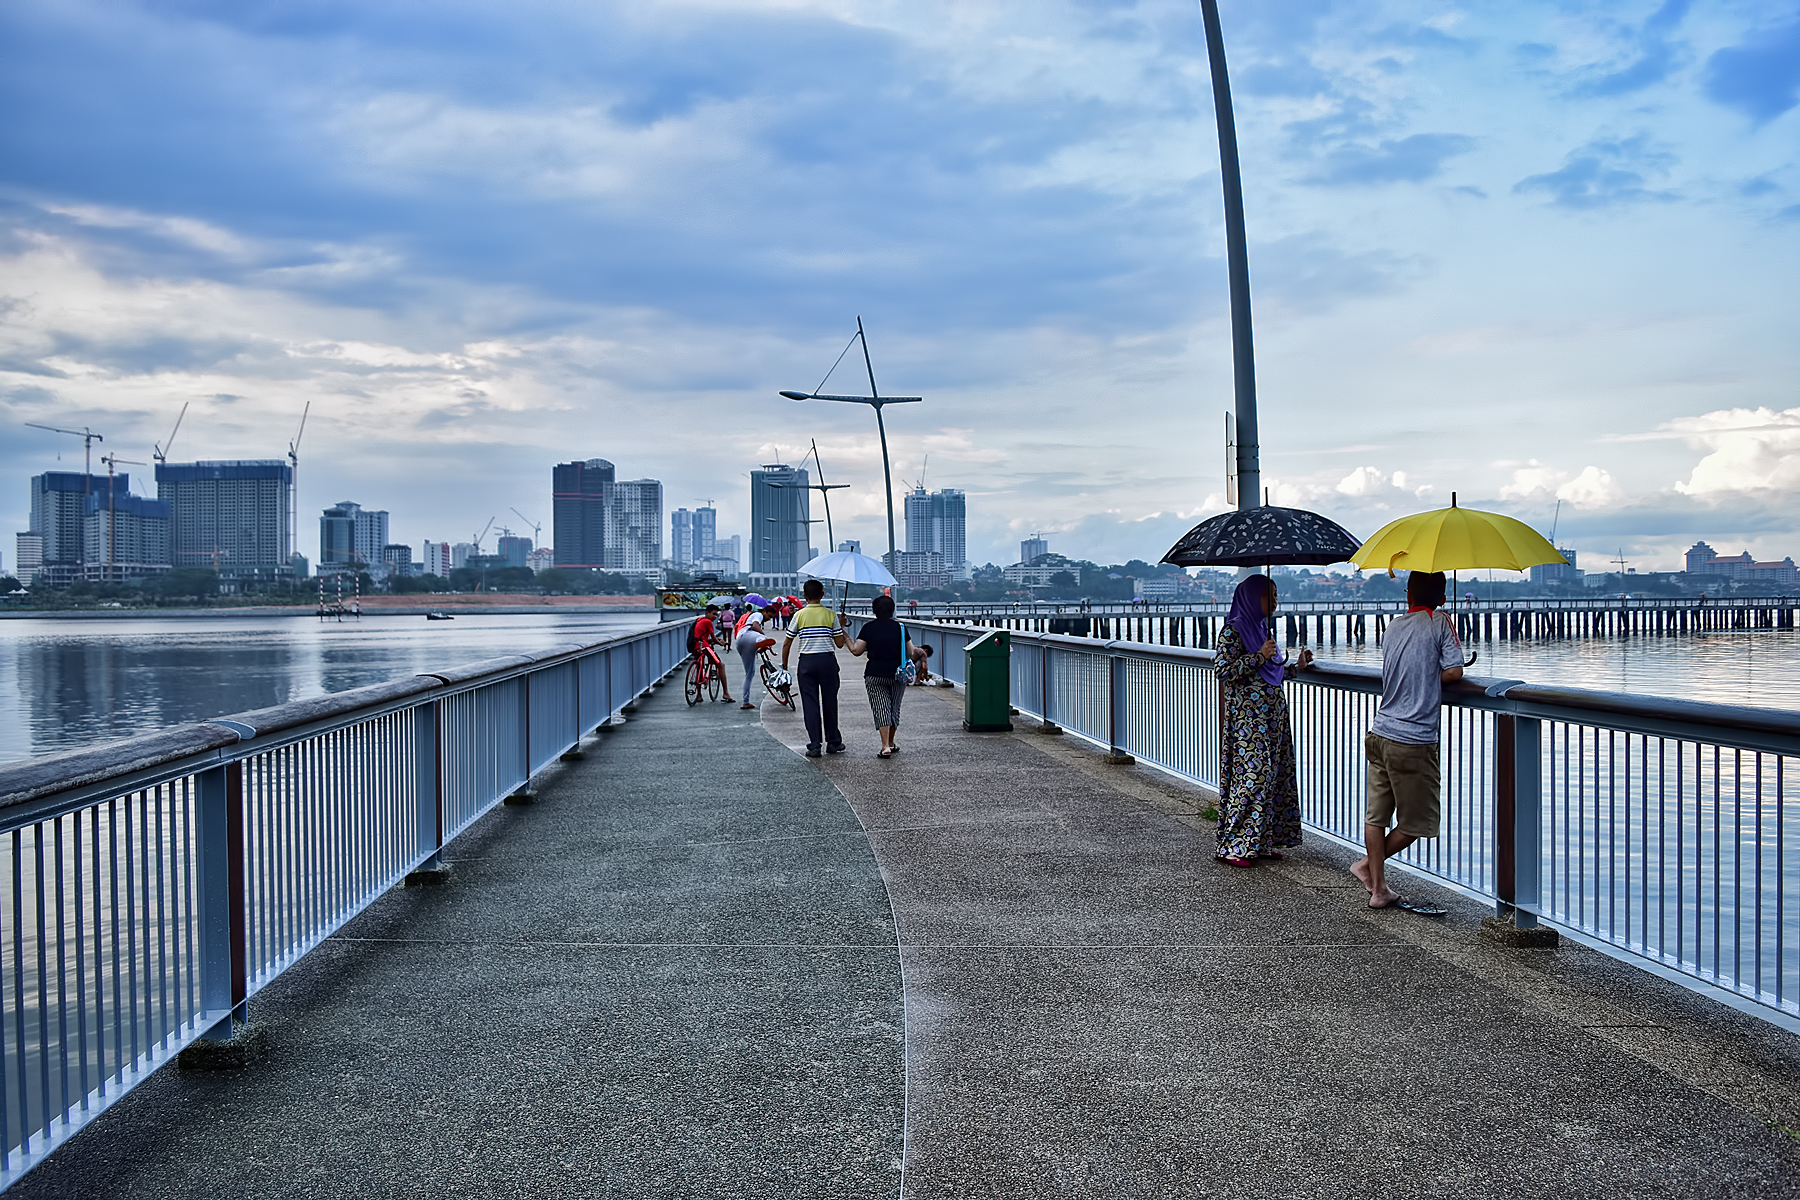 A shot of a pathway that leads to Woodlands Waterfront Park Jetty, overshadowed by cloudy skies